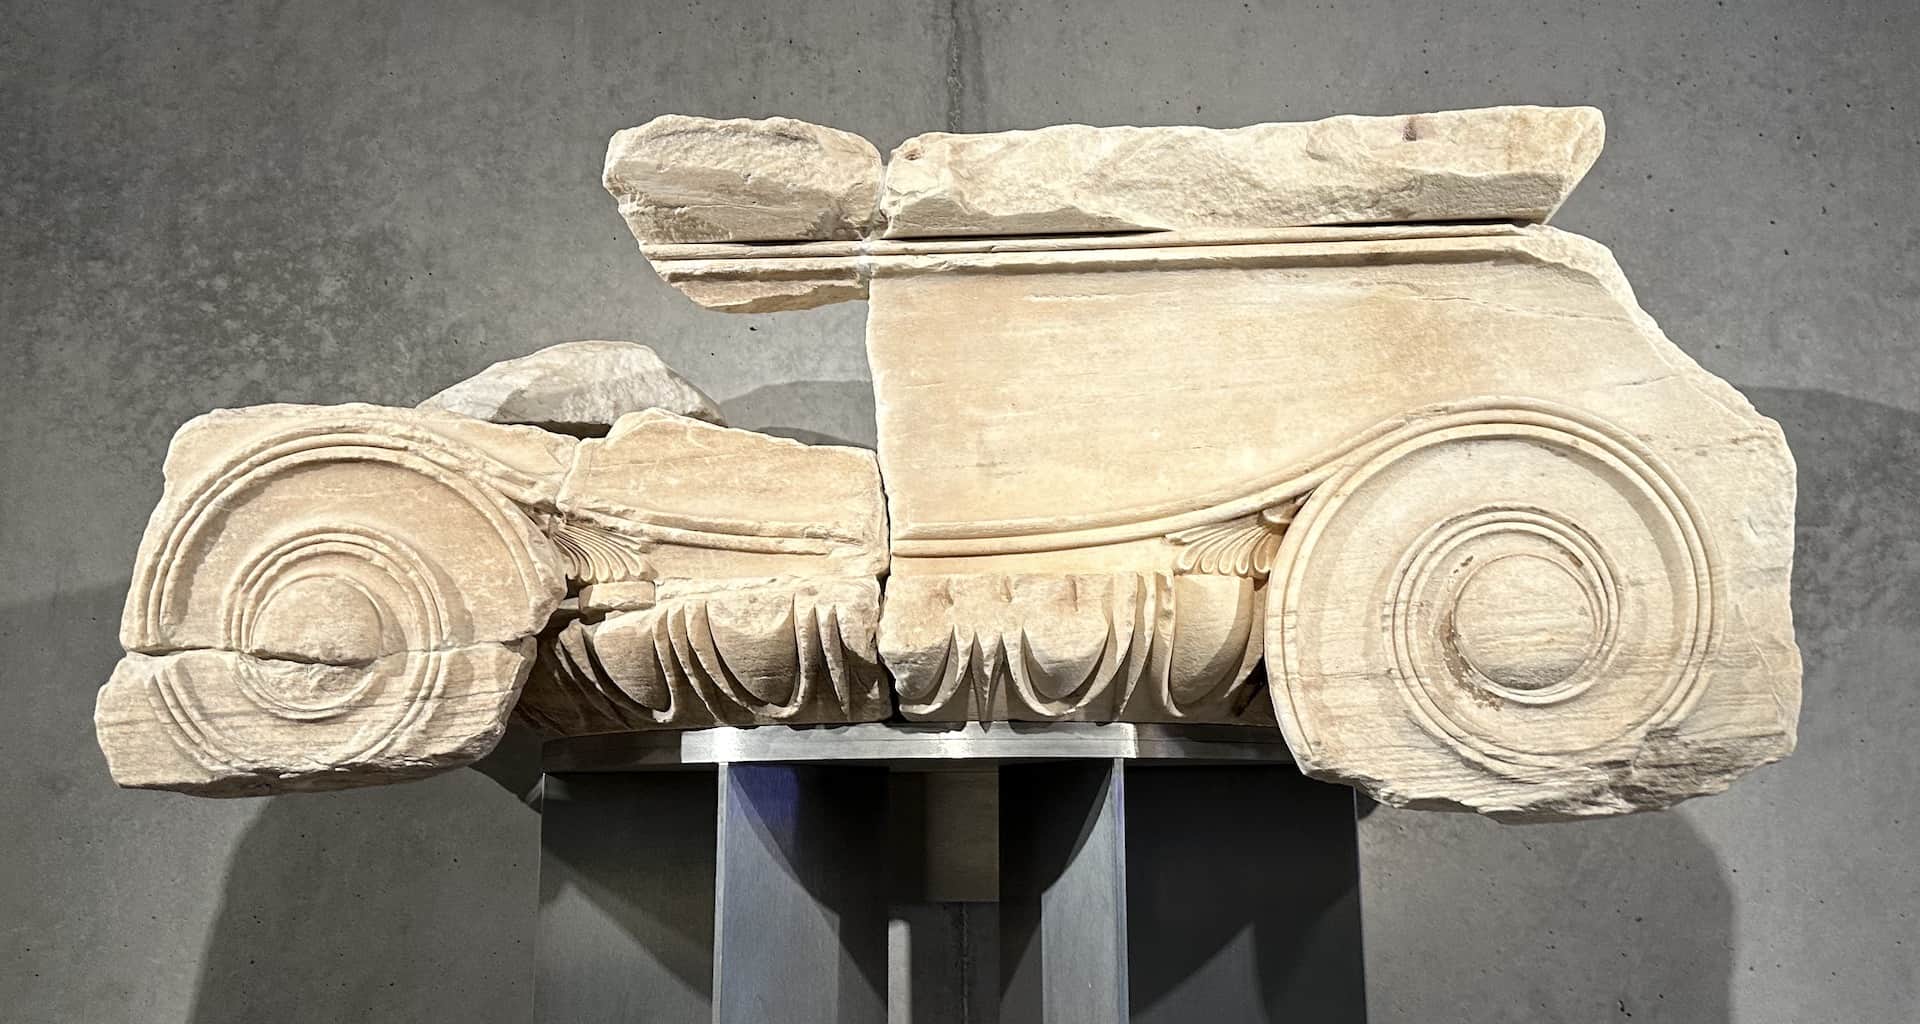 Ionic column capital from one of the six columns lining the central entrance of the Propylaia